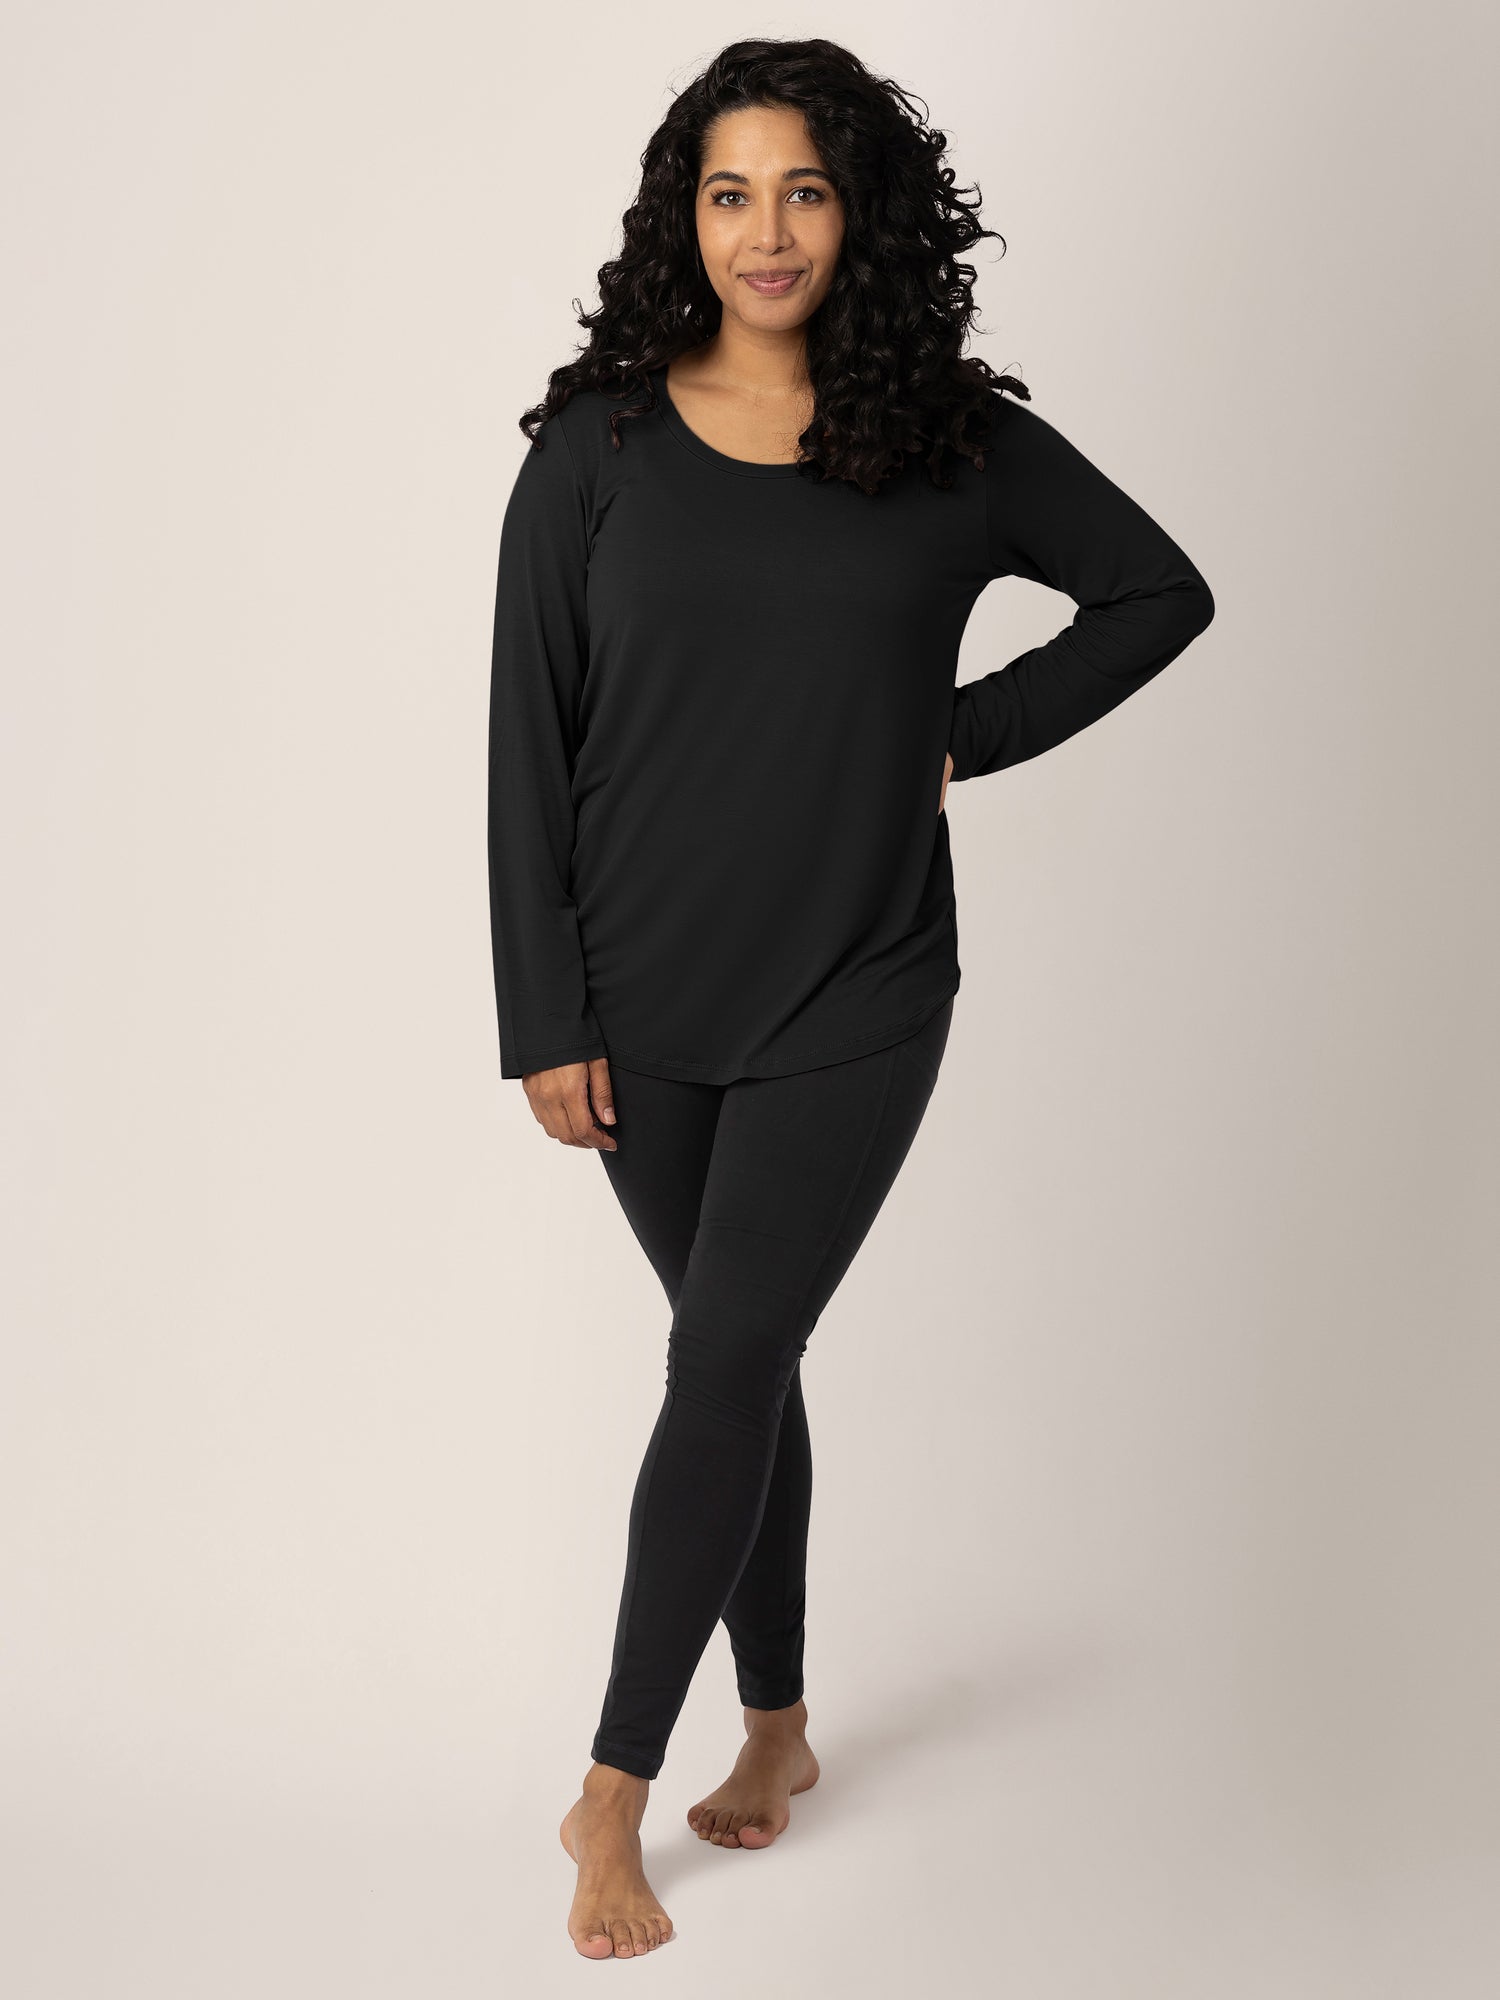 Full body view of a model wearing the Bamboo Maternity & Nursing Long Sleeve T-Shirt in Black.